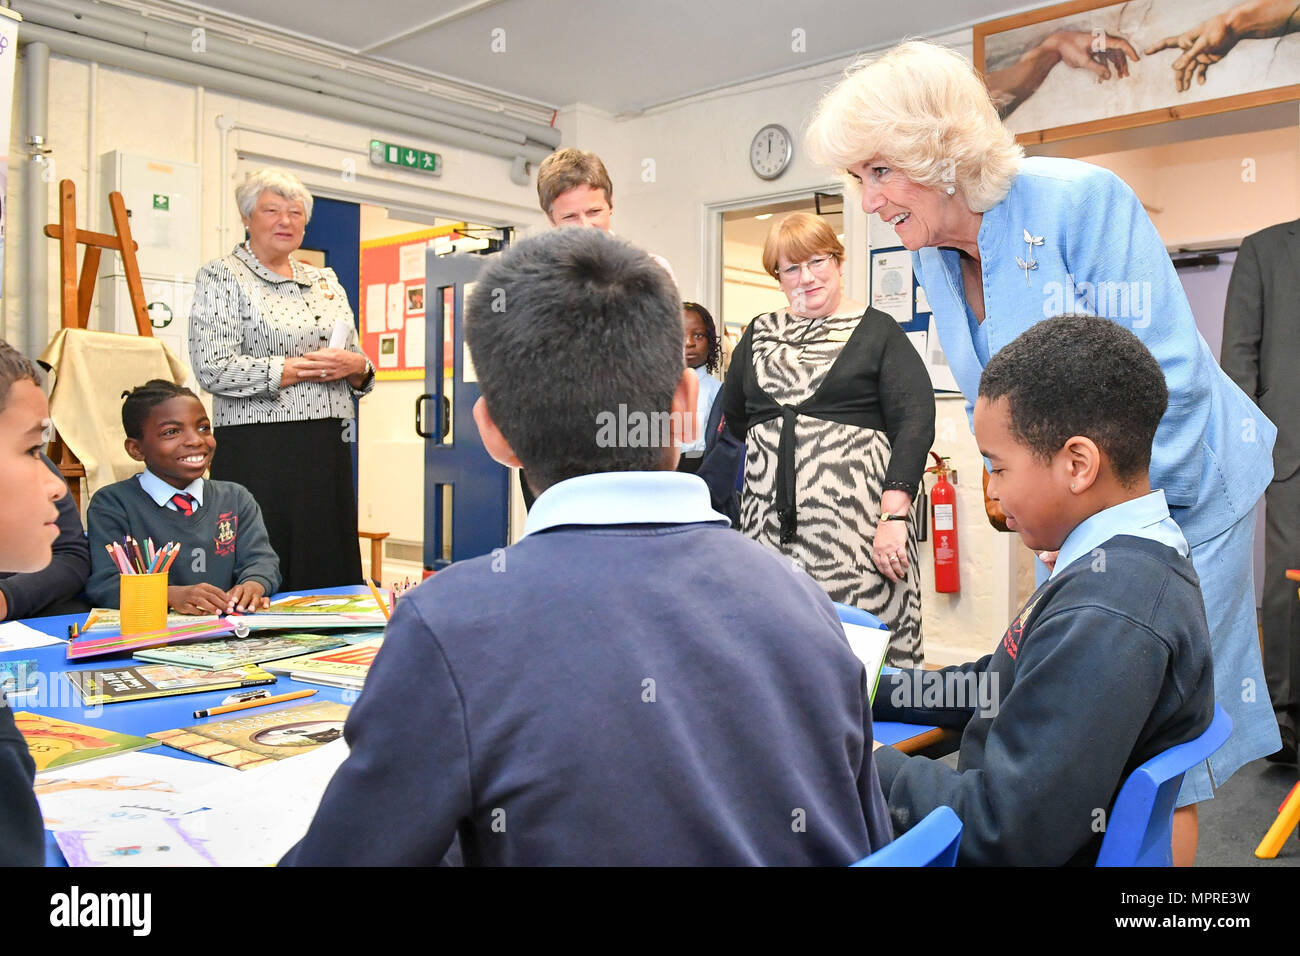 the-duchess-of-cornwall-joins-in-a-beanstalk-reading-session-with-pupils-of-st-james-church-of-england-junior-school-gloucester-MPRE3W.jpg